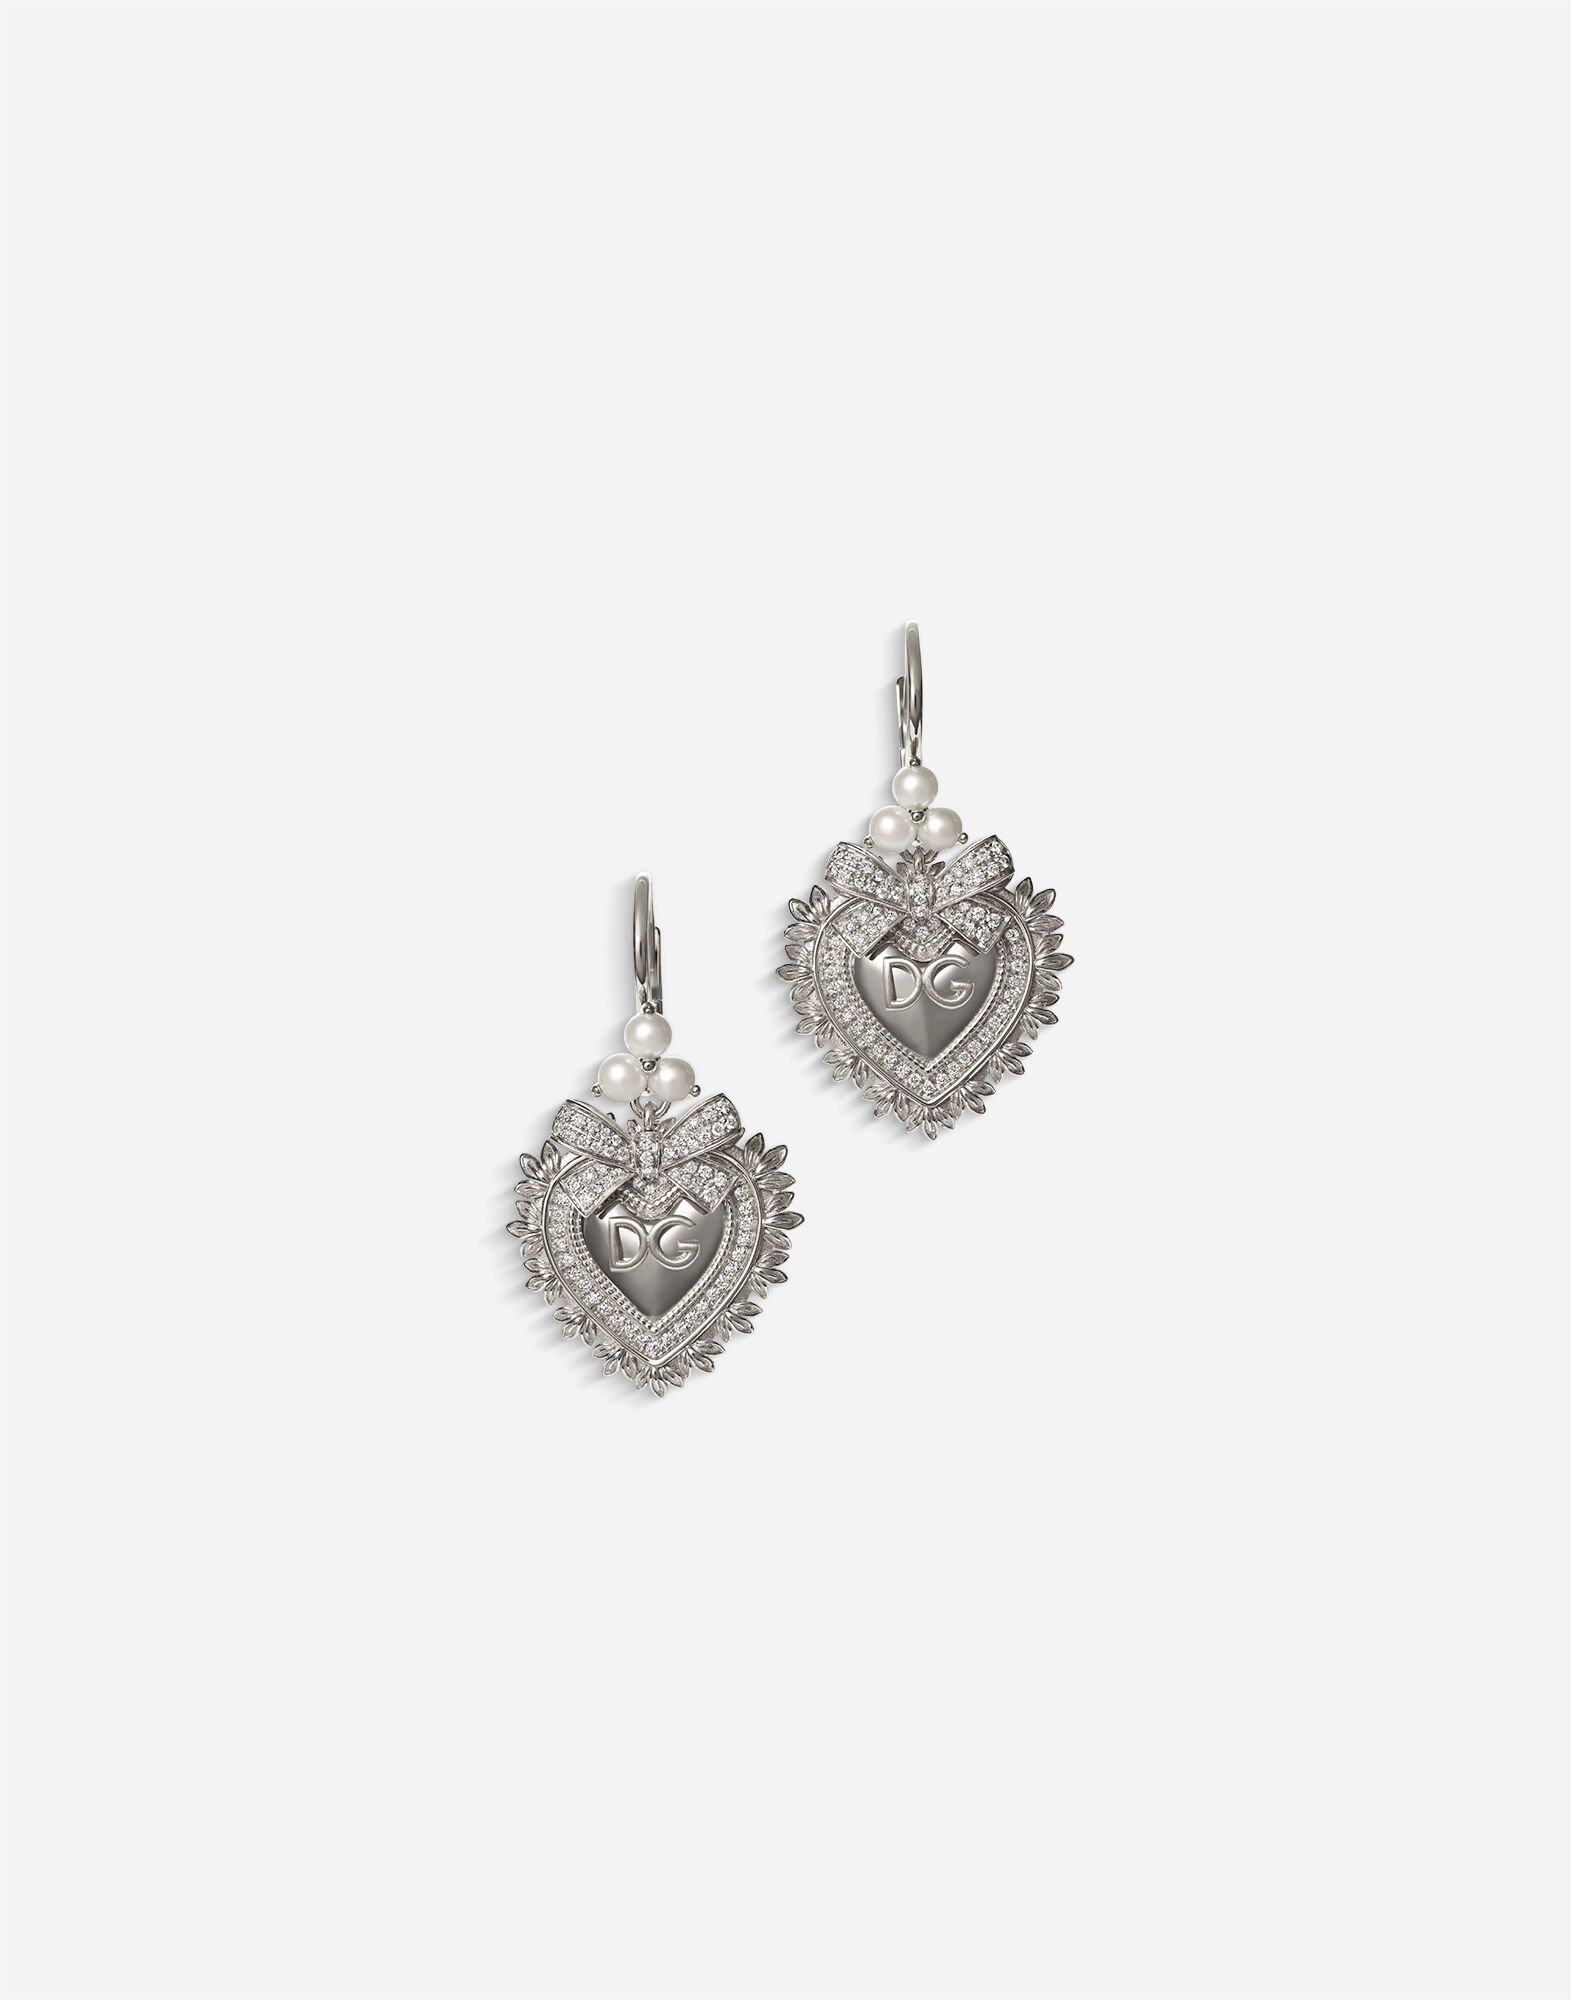 ${brand} Devotion earrings in white gold with diamonds and pearls ${colorDescription} ${masterID}